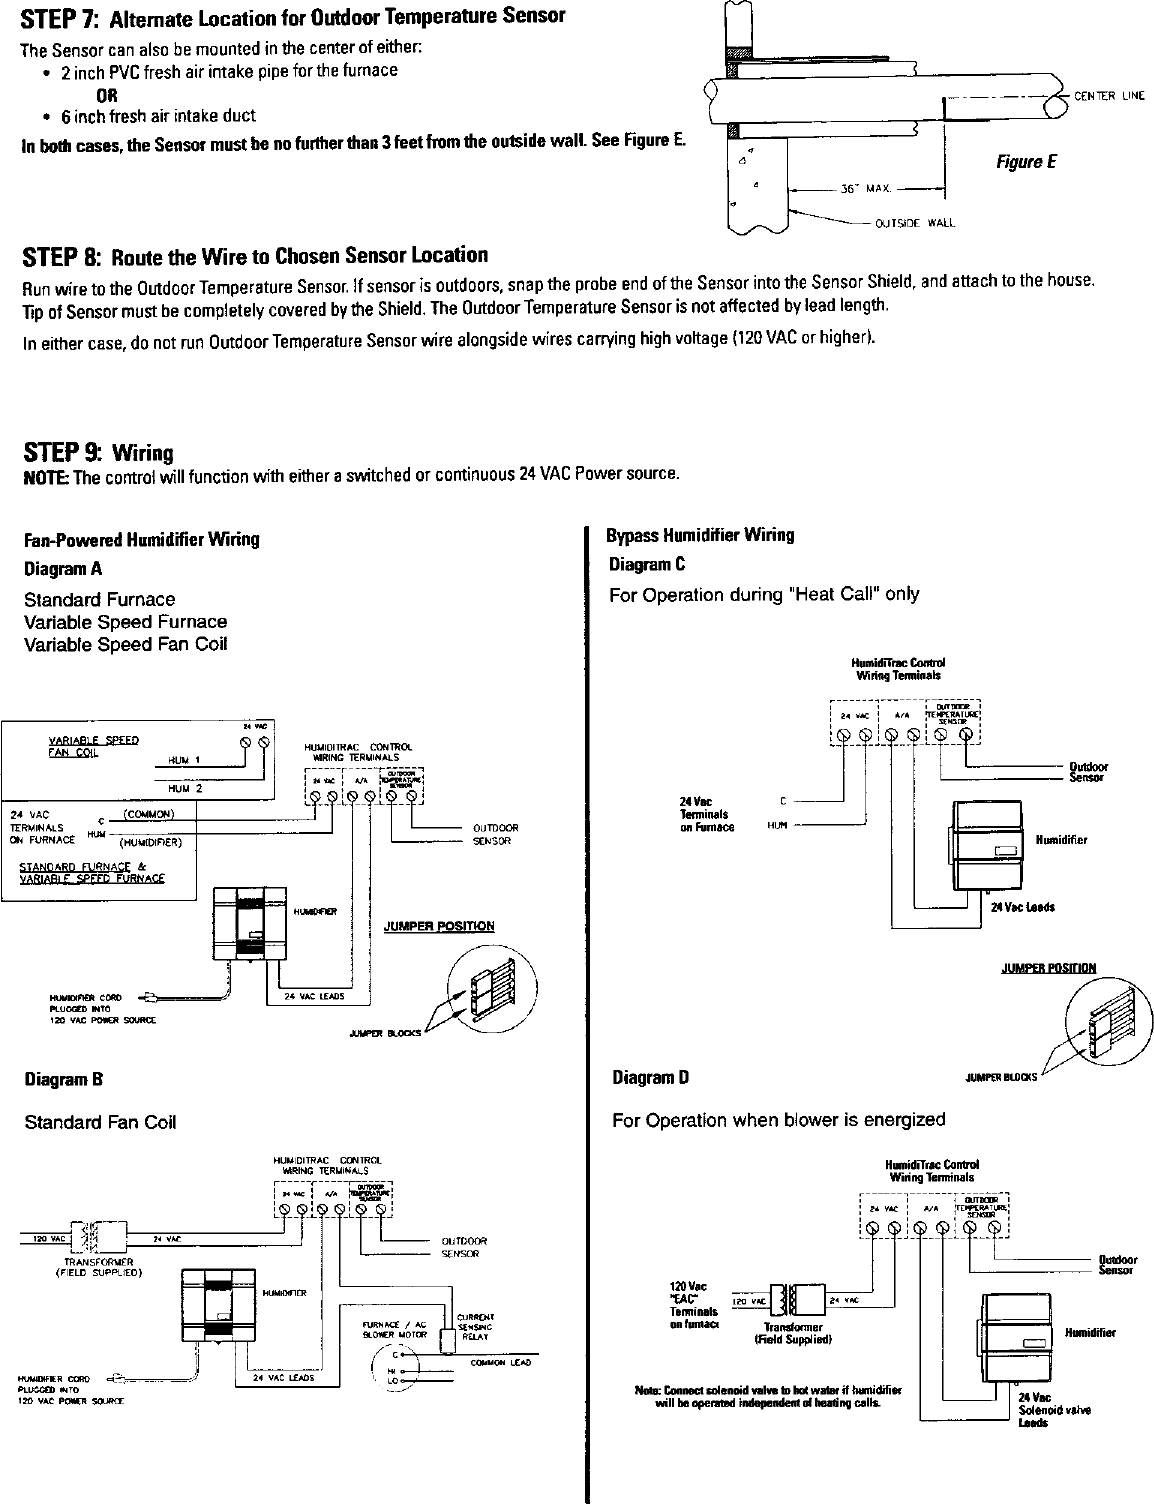 Page 2 of 4 - CARRIER  Controls And HVAC Accessories Manual L0211035